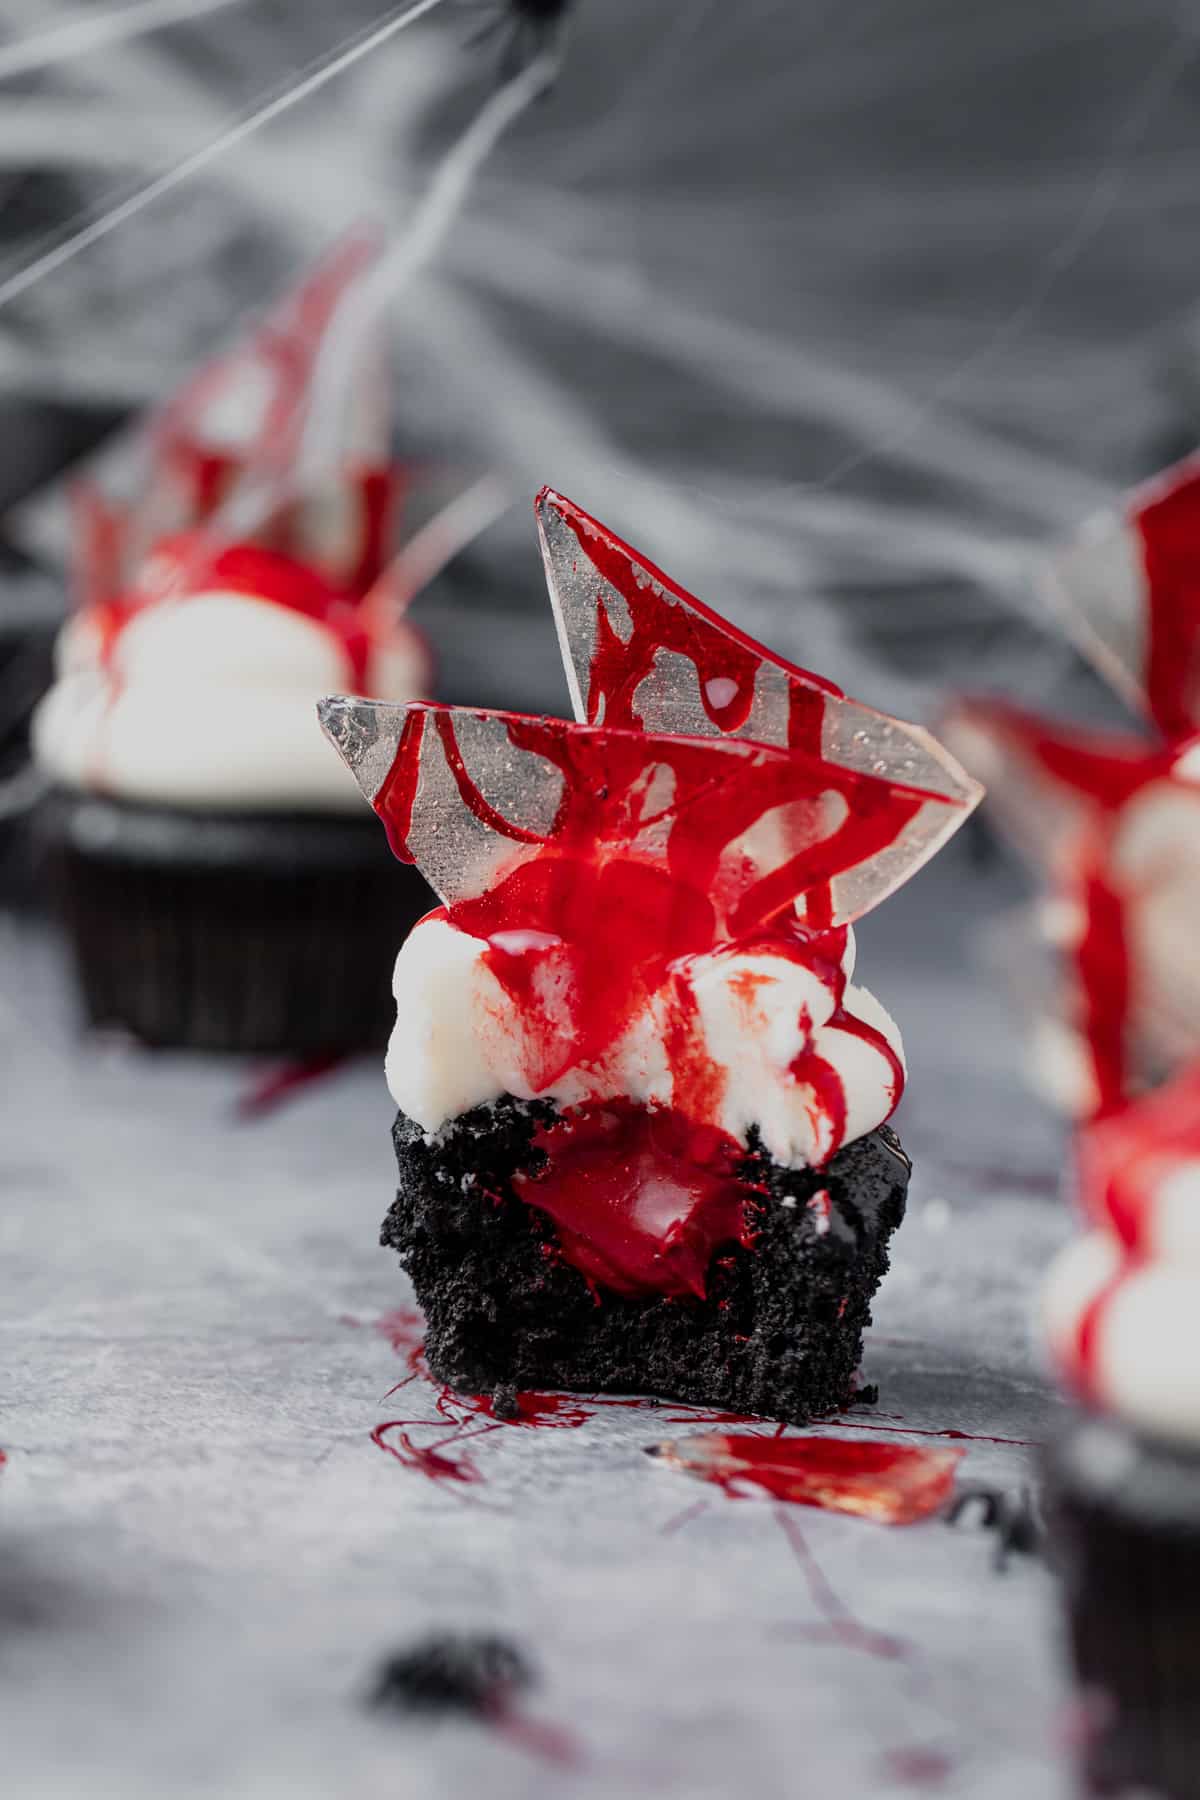 bloody halloween cupcakes with bite taken out to see red chocolate ganache oozing out.